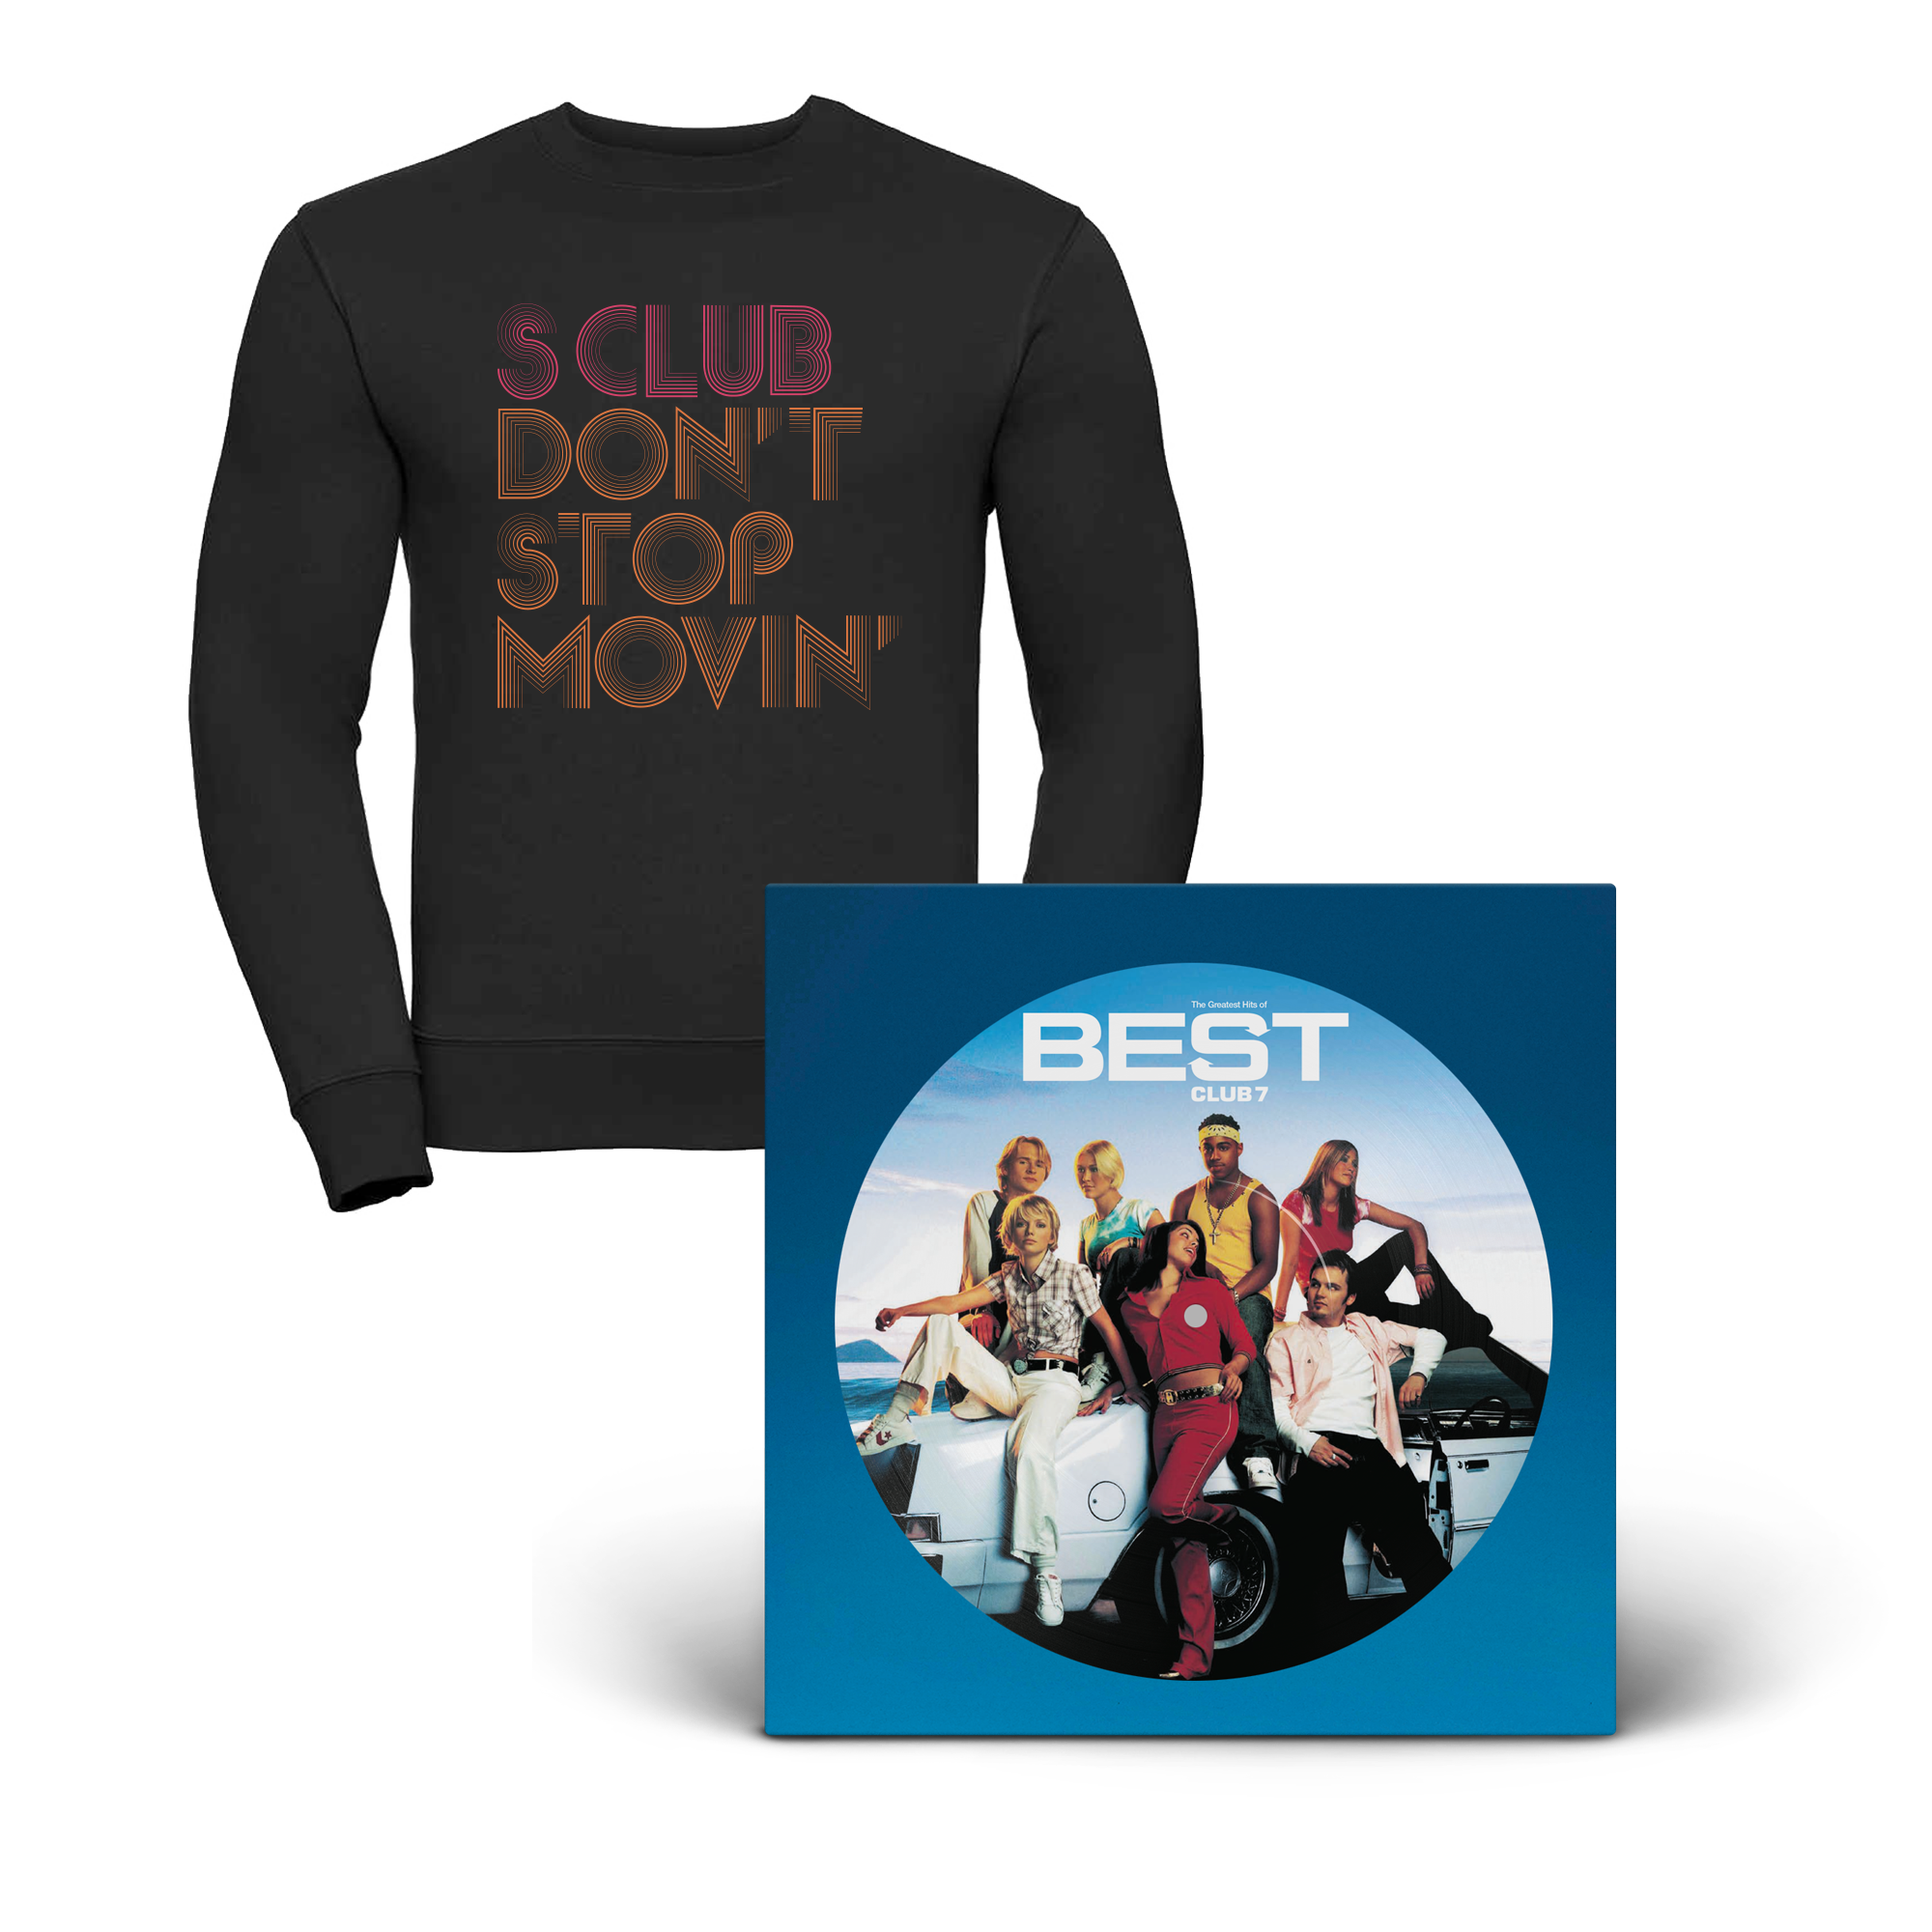 Best - The Greatest Hits Of S Club 7: Picture Disc Vinyl LP + Don't Stop Movin' Sweatshirt